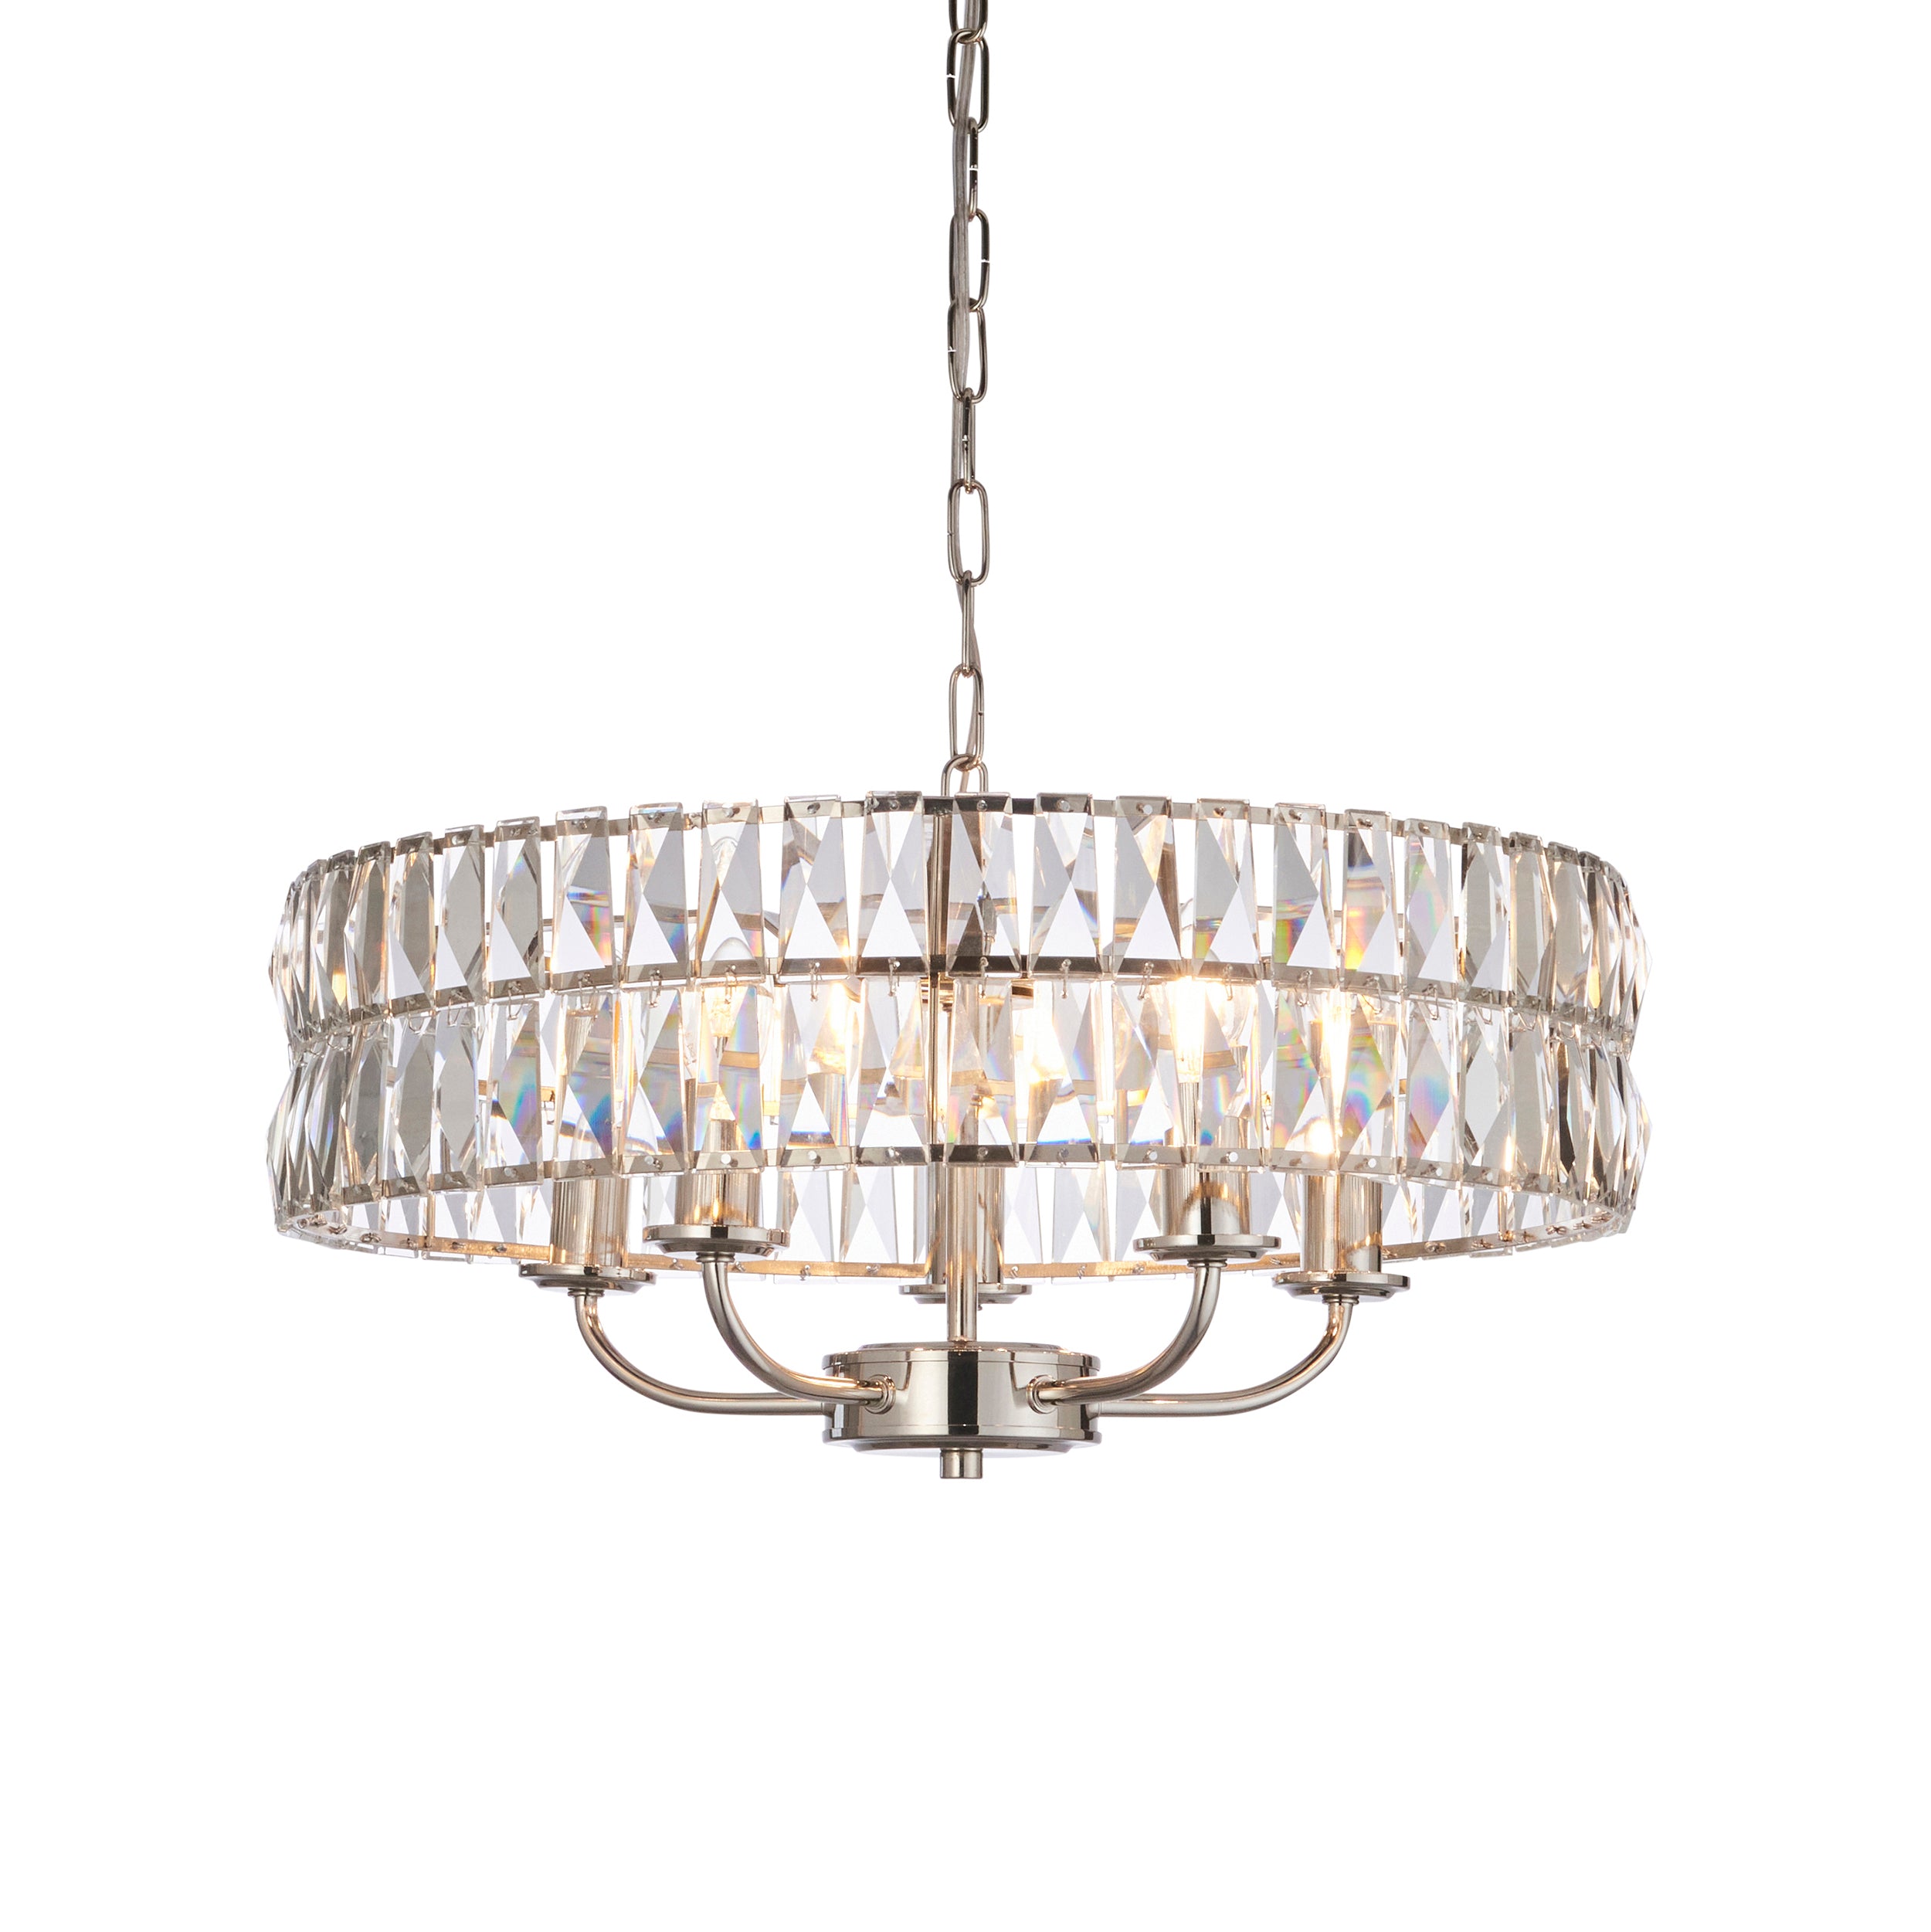 Clifton Decorative Nickel & Clear Faceted Glass 5 Light Pendant